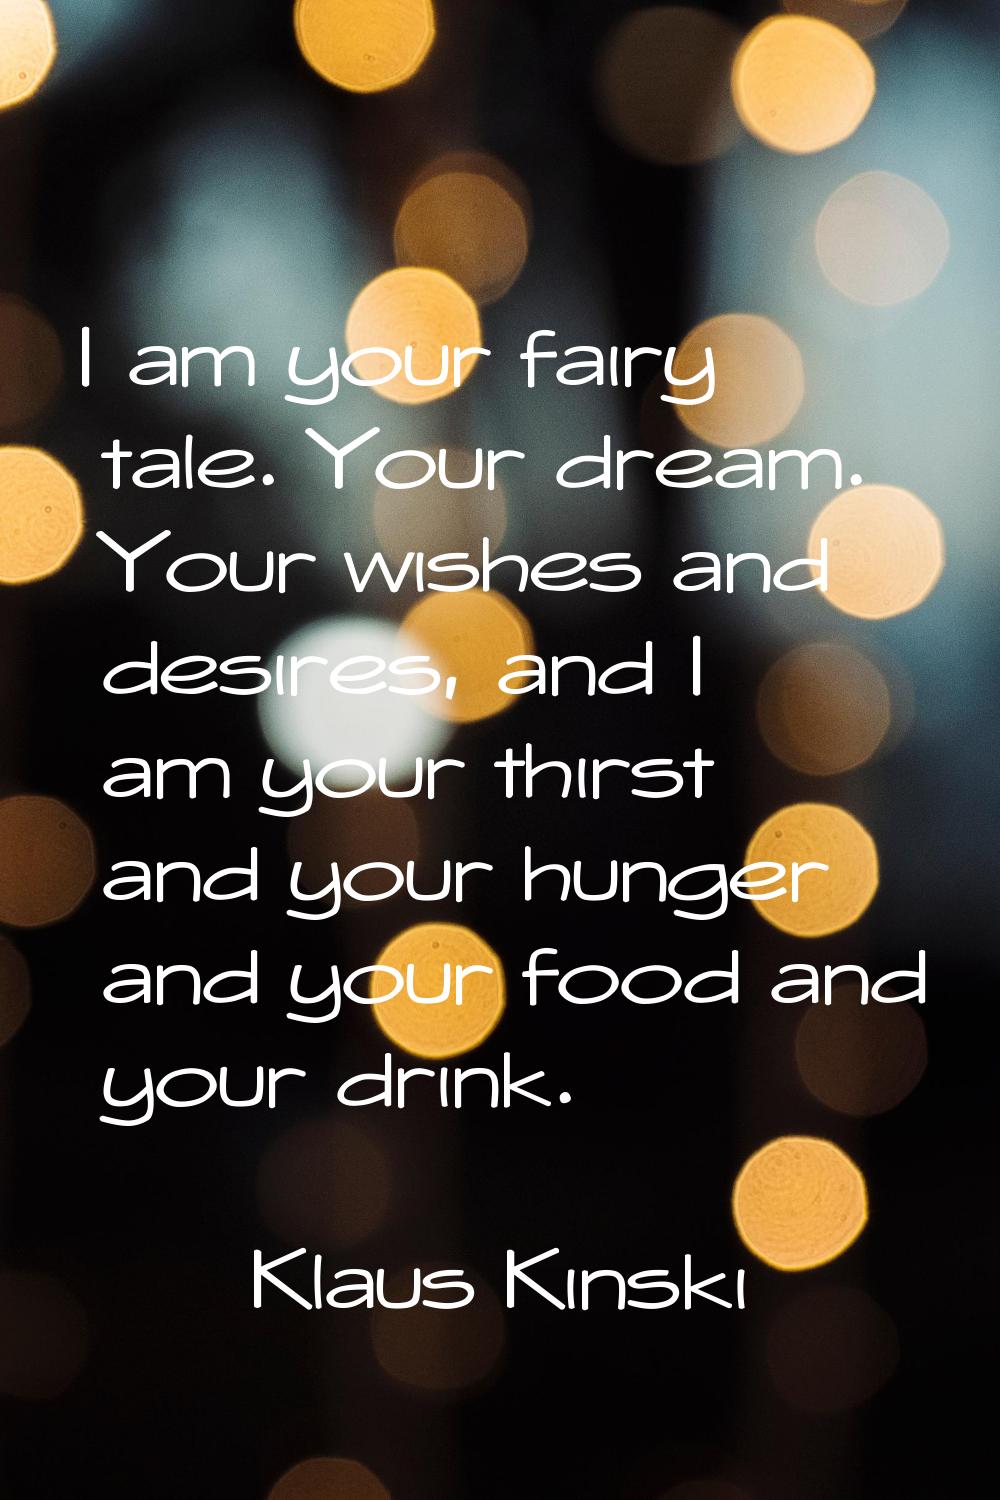 I am your fairy tale. Your dream. Your wishes and desires, and I am your thirst and your hunger and